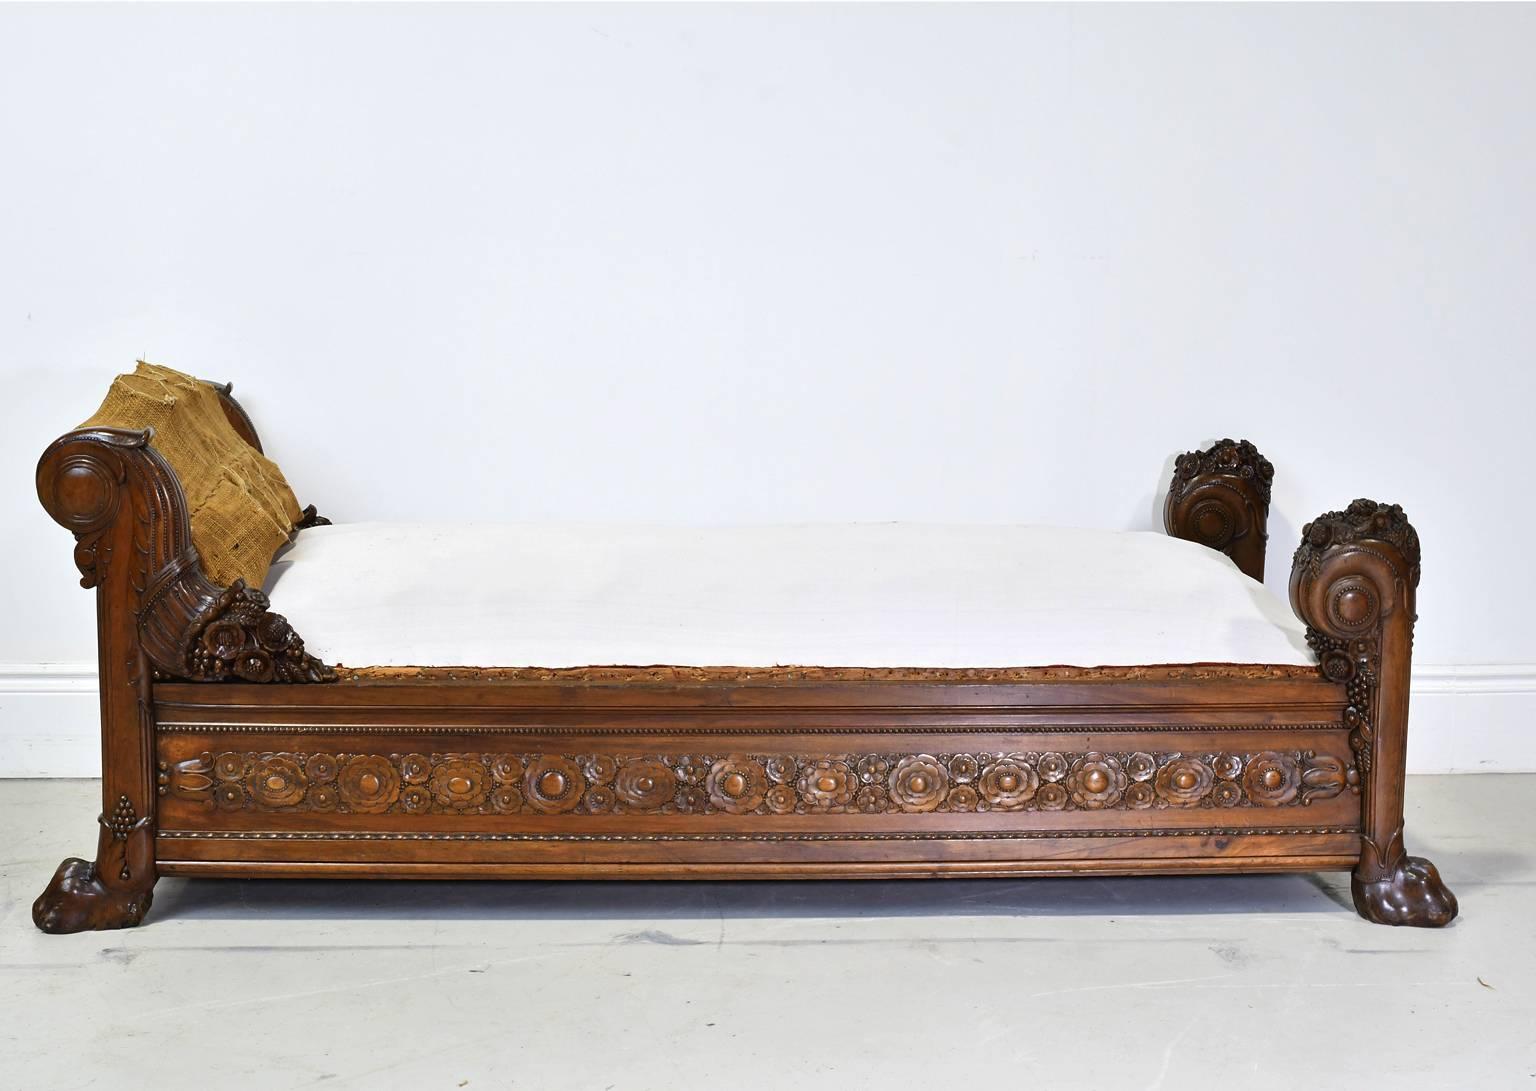 A very beautiful and opulent French daybed in mahogany from the Directoire period which preceded Napoleon's Empire and followed the reign of Louis XVI. The panels of the side and foot rails are carved with rosettes and the posts are scrolled and